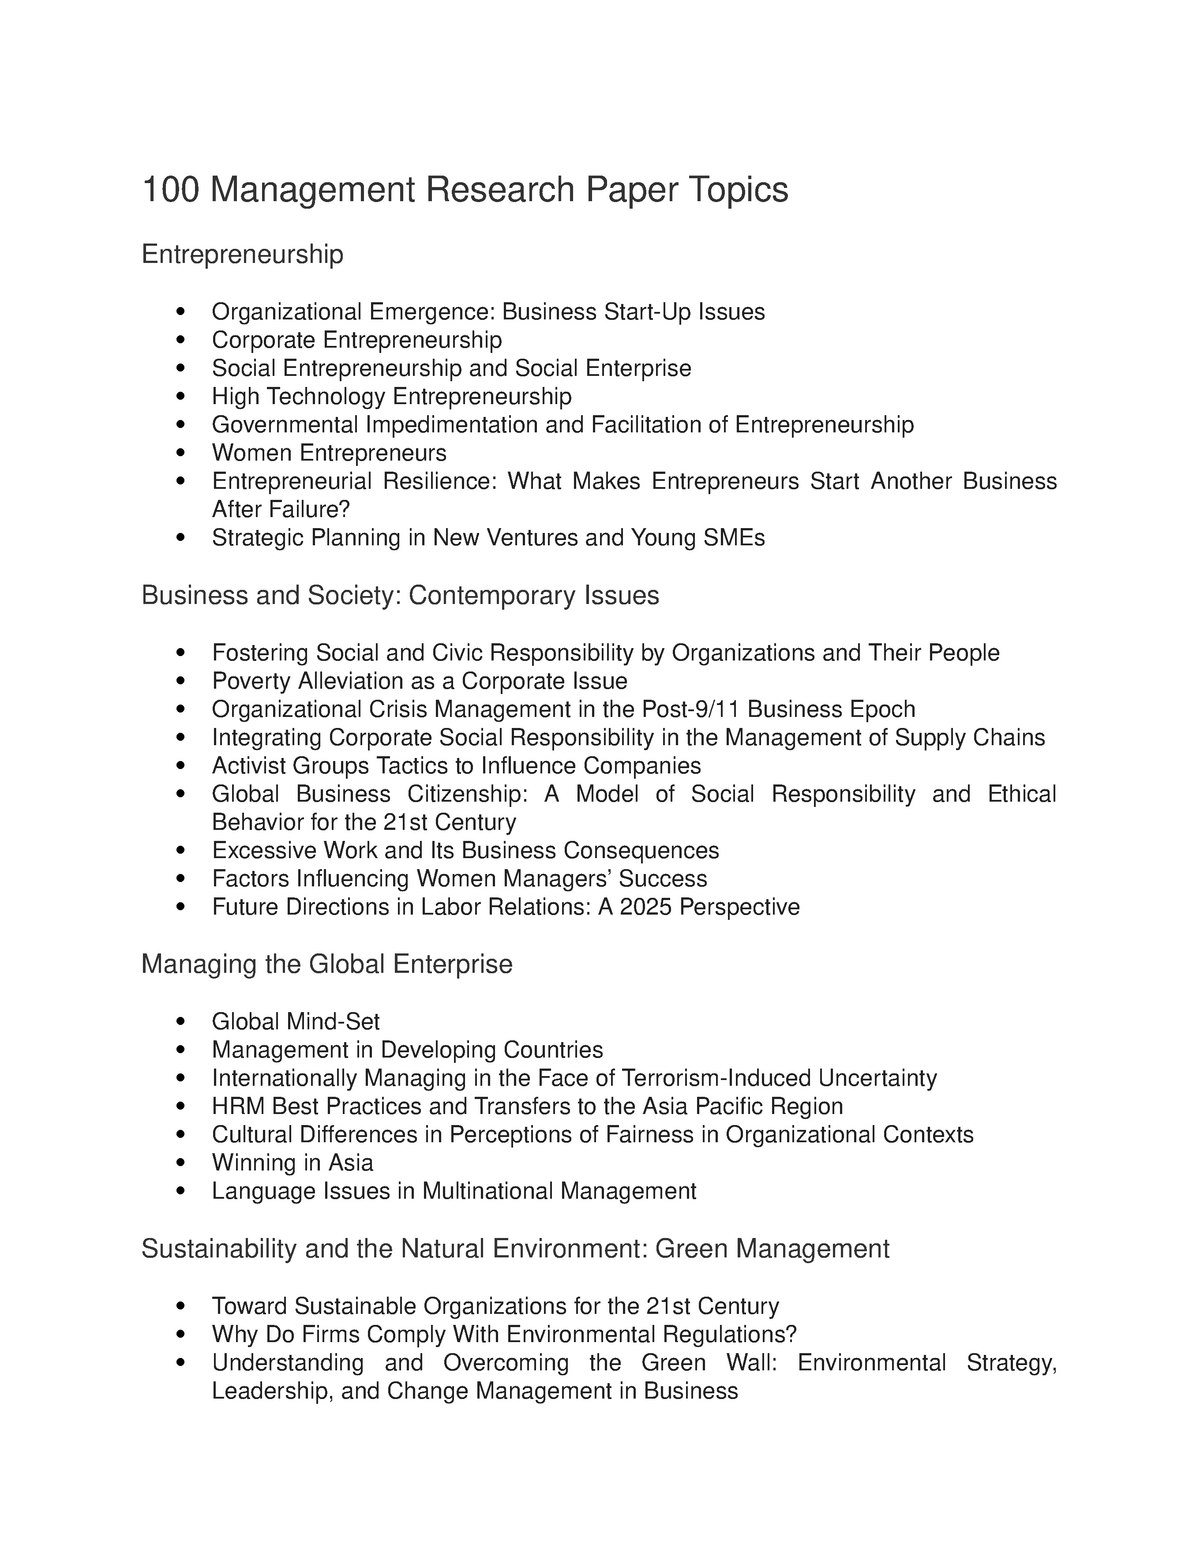 environment related research topics